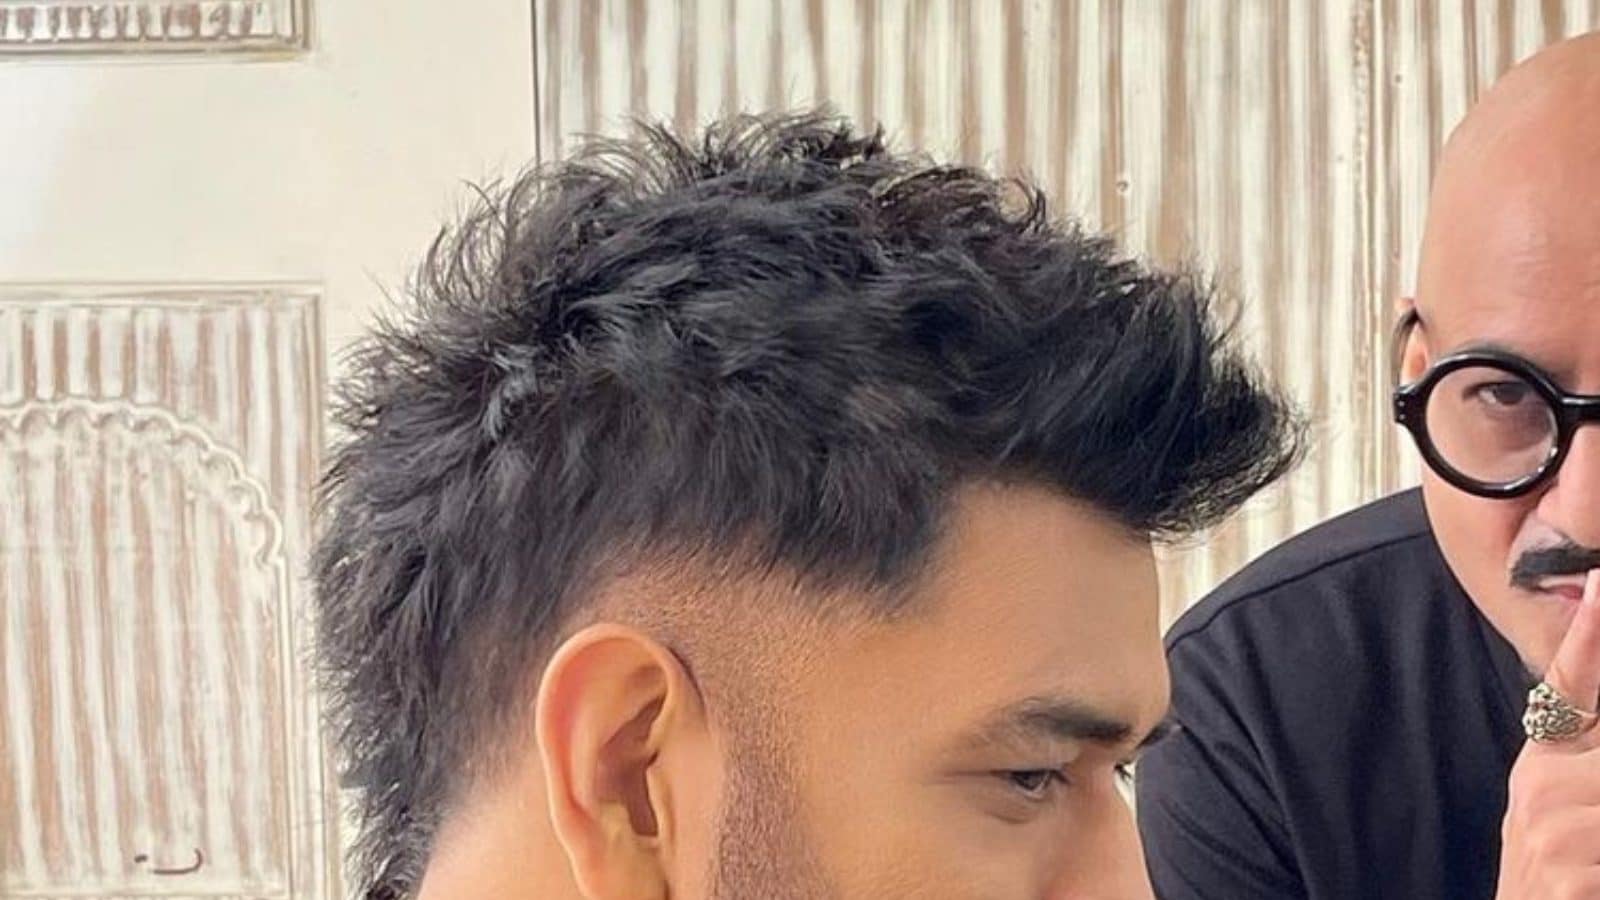 IPL 2022: MS Dhoni Appeared With A New Hairstyle - Latest Cricket News of  today India